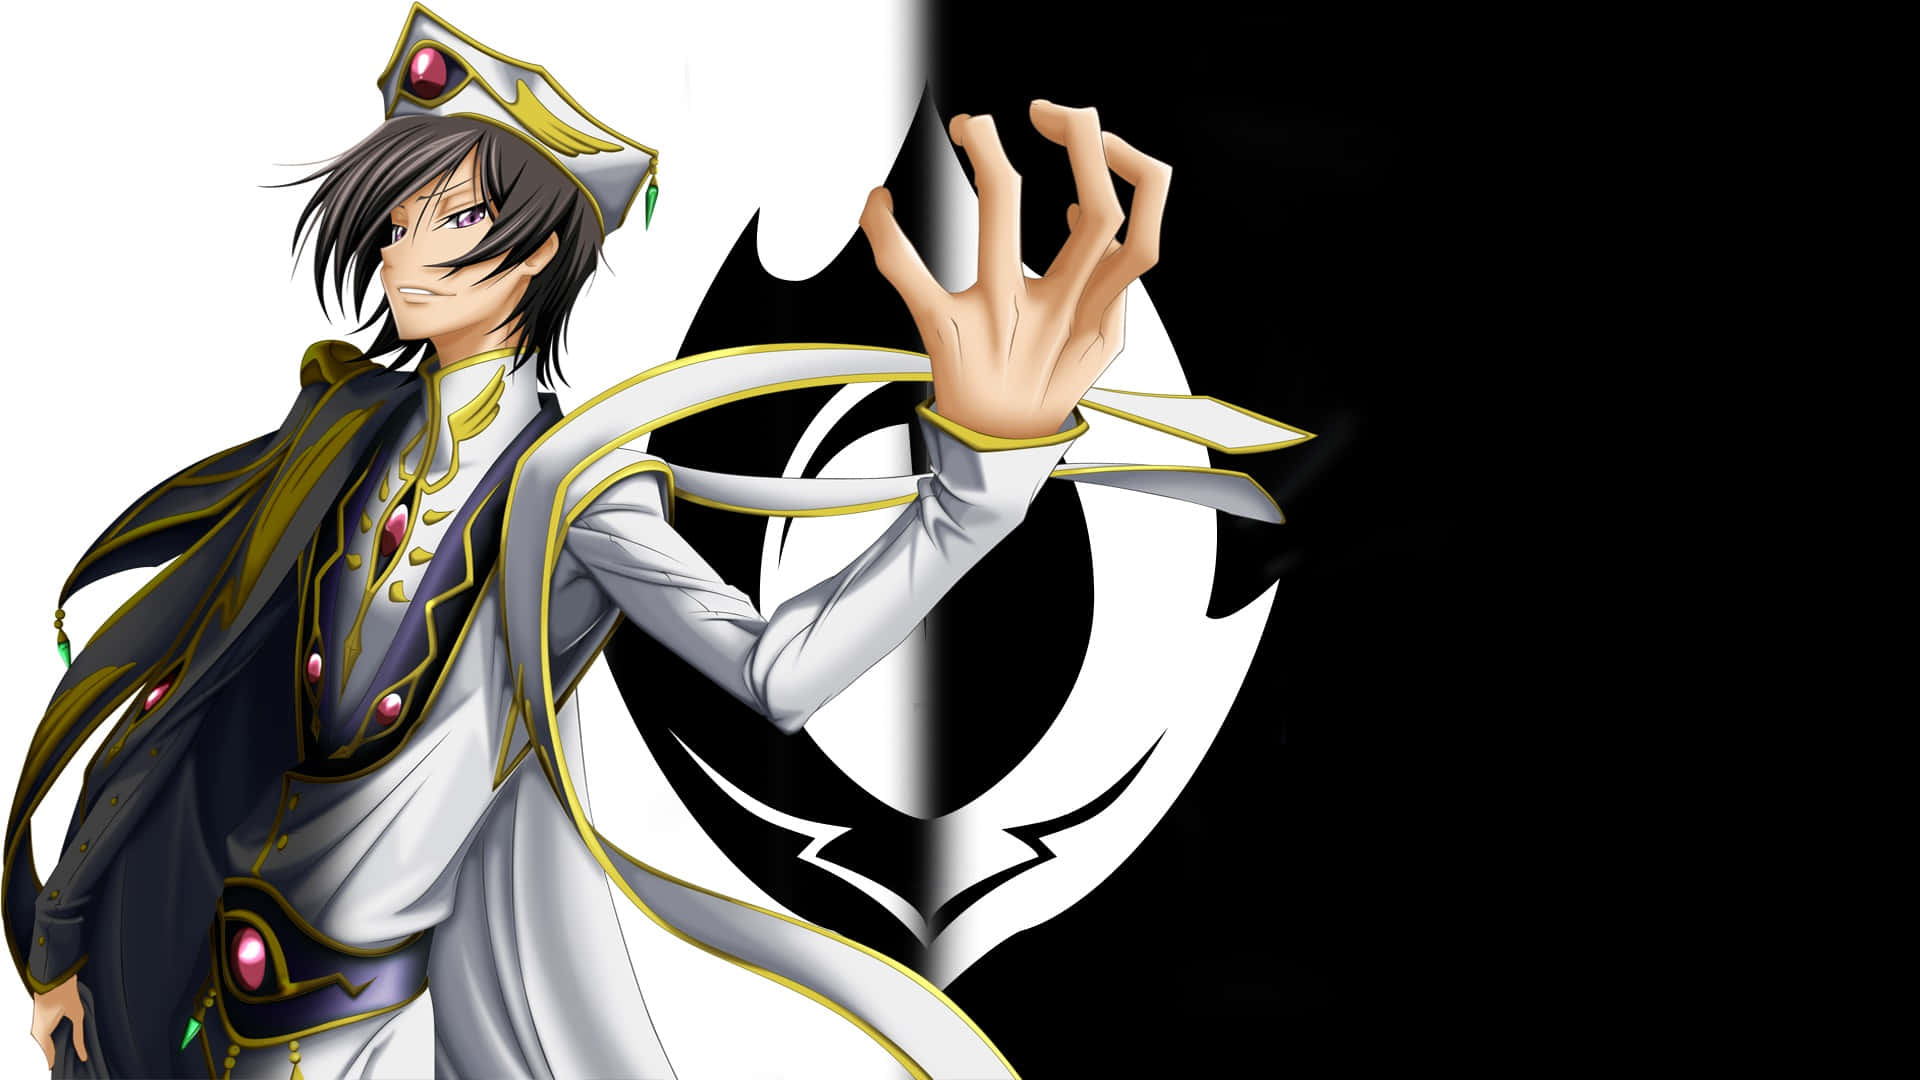 Lelouch and C.C. - Stars of the Anime Series Code Geass